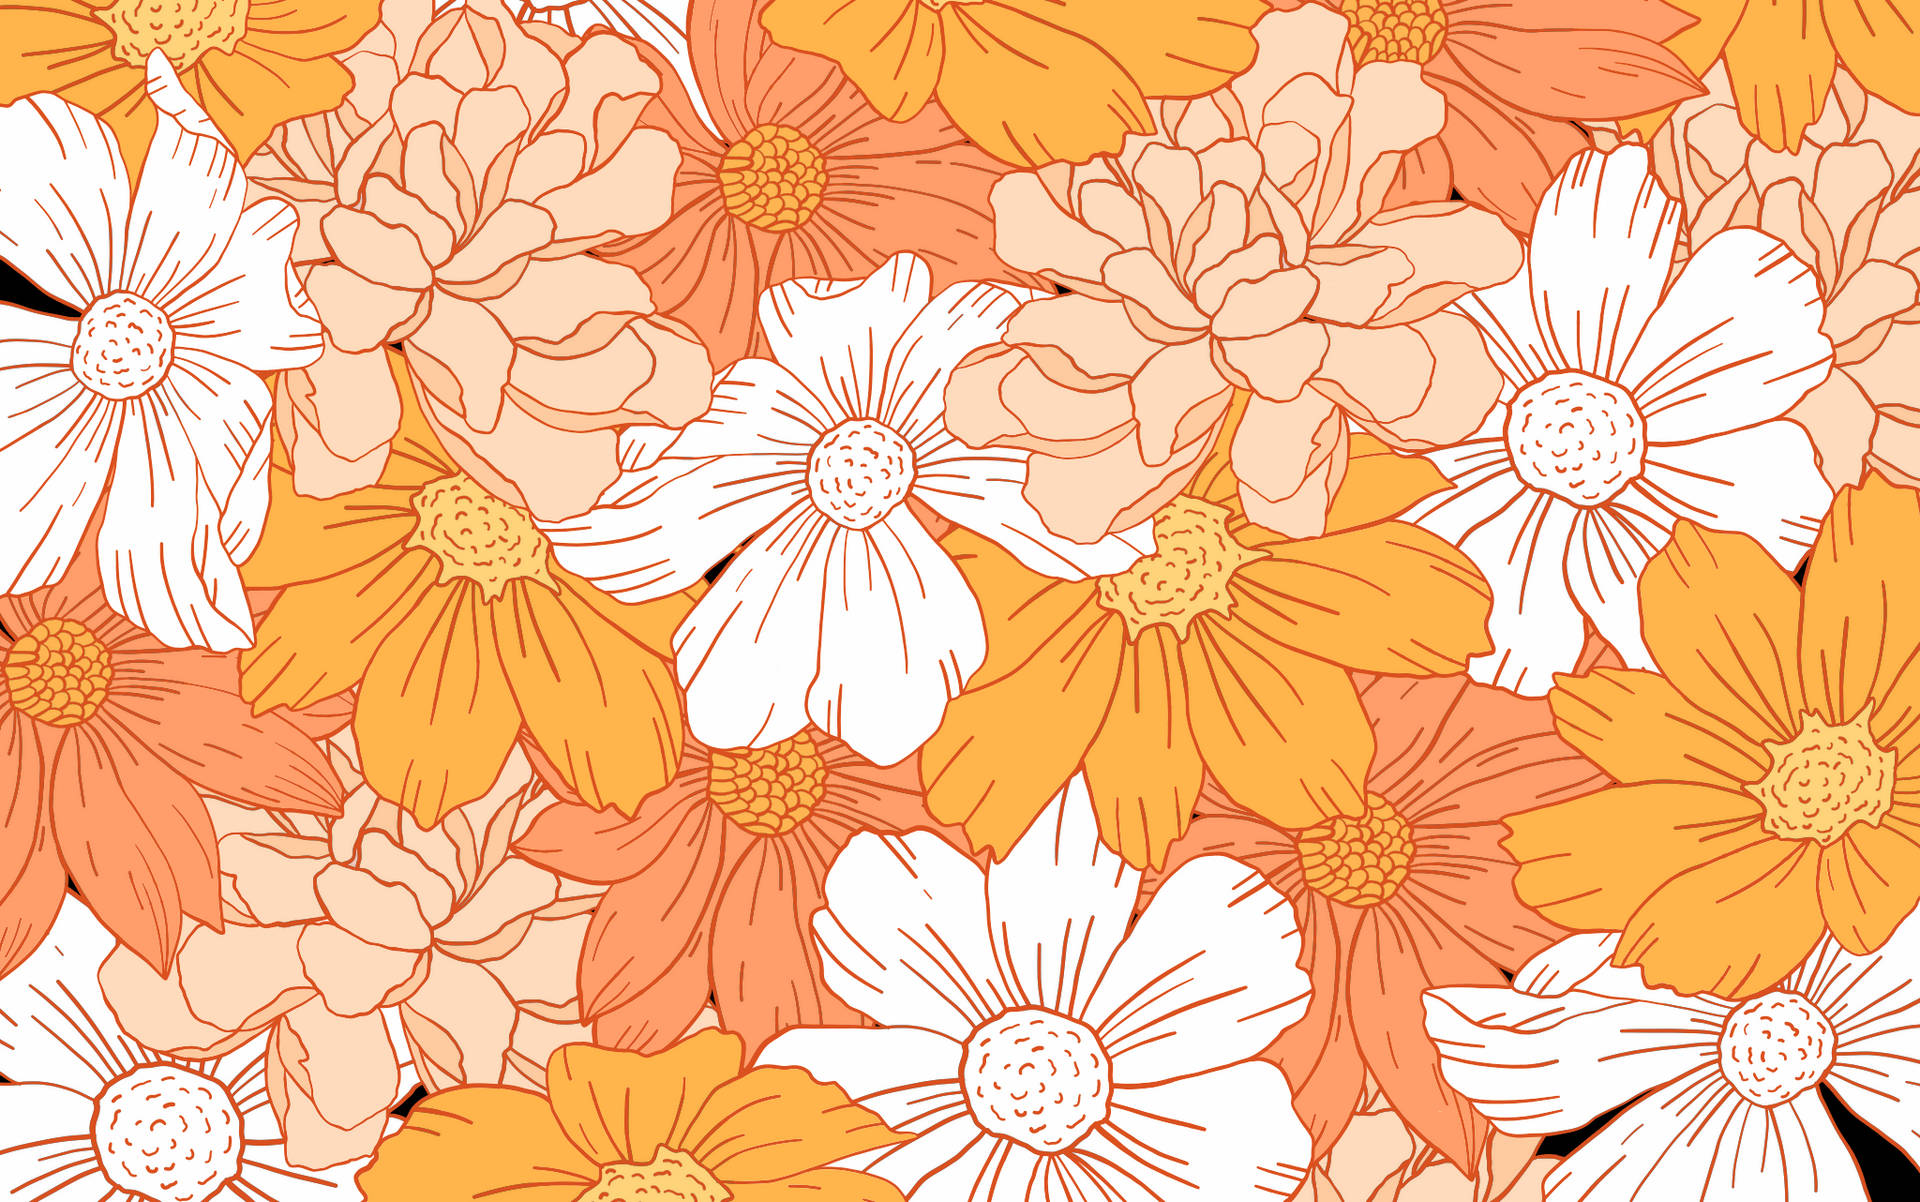 A Floral Pattern With Orange And White Flowers Wallpaper